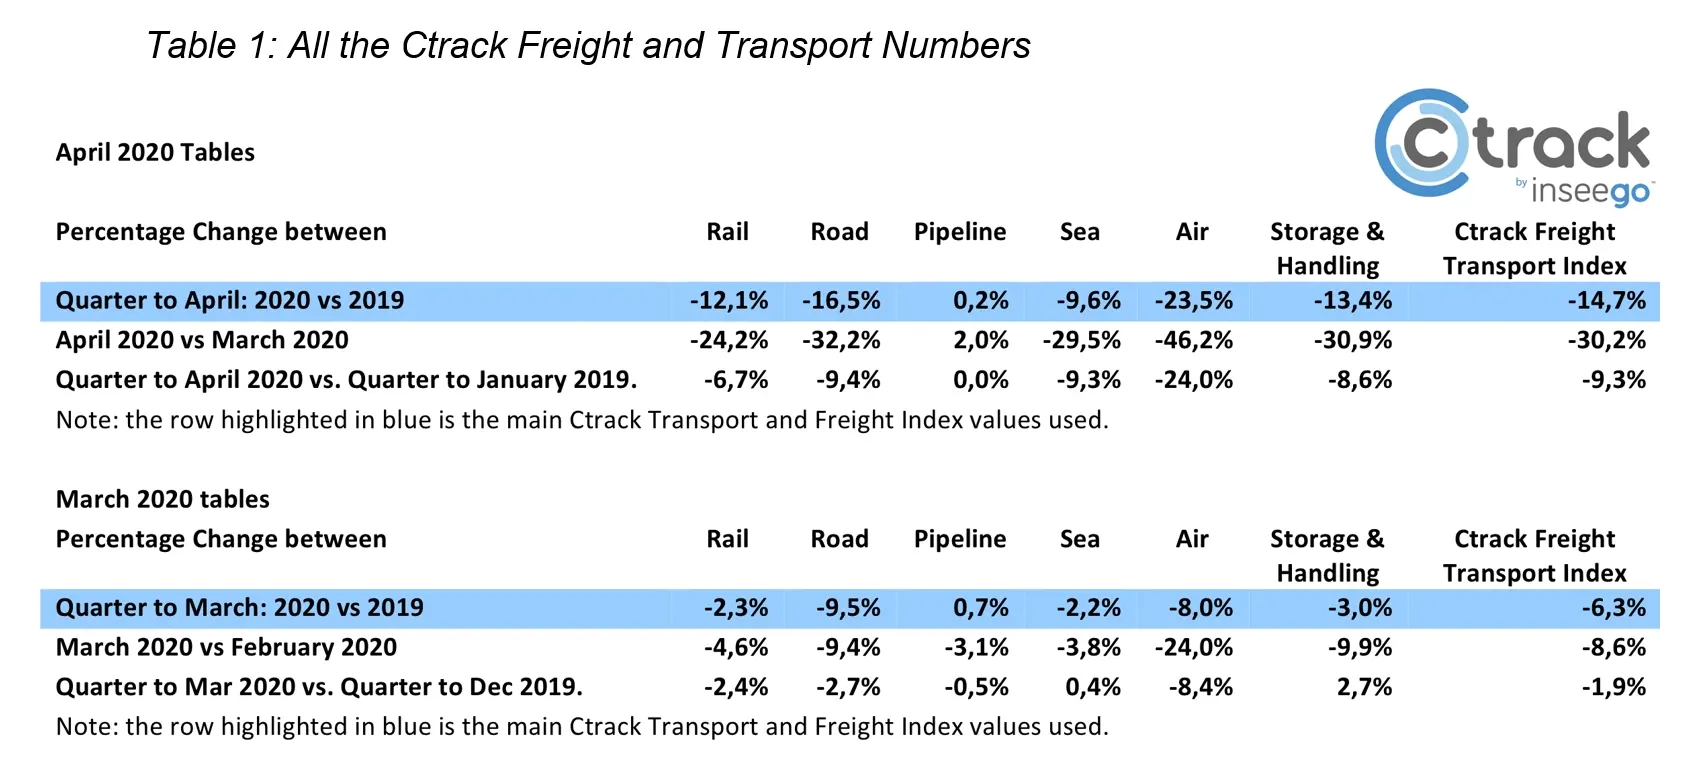 Table 1 - All the Ctrack Freight and Transport Numbers - May 2020